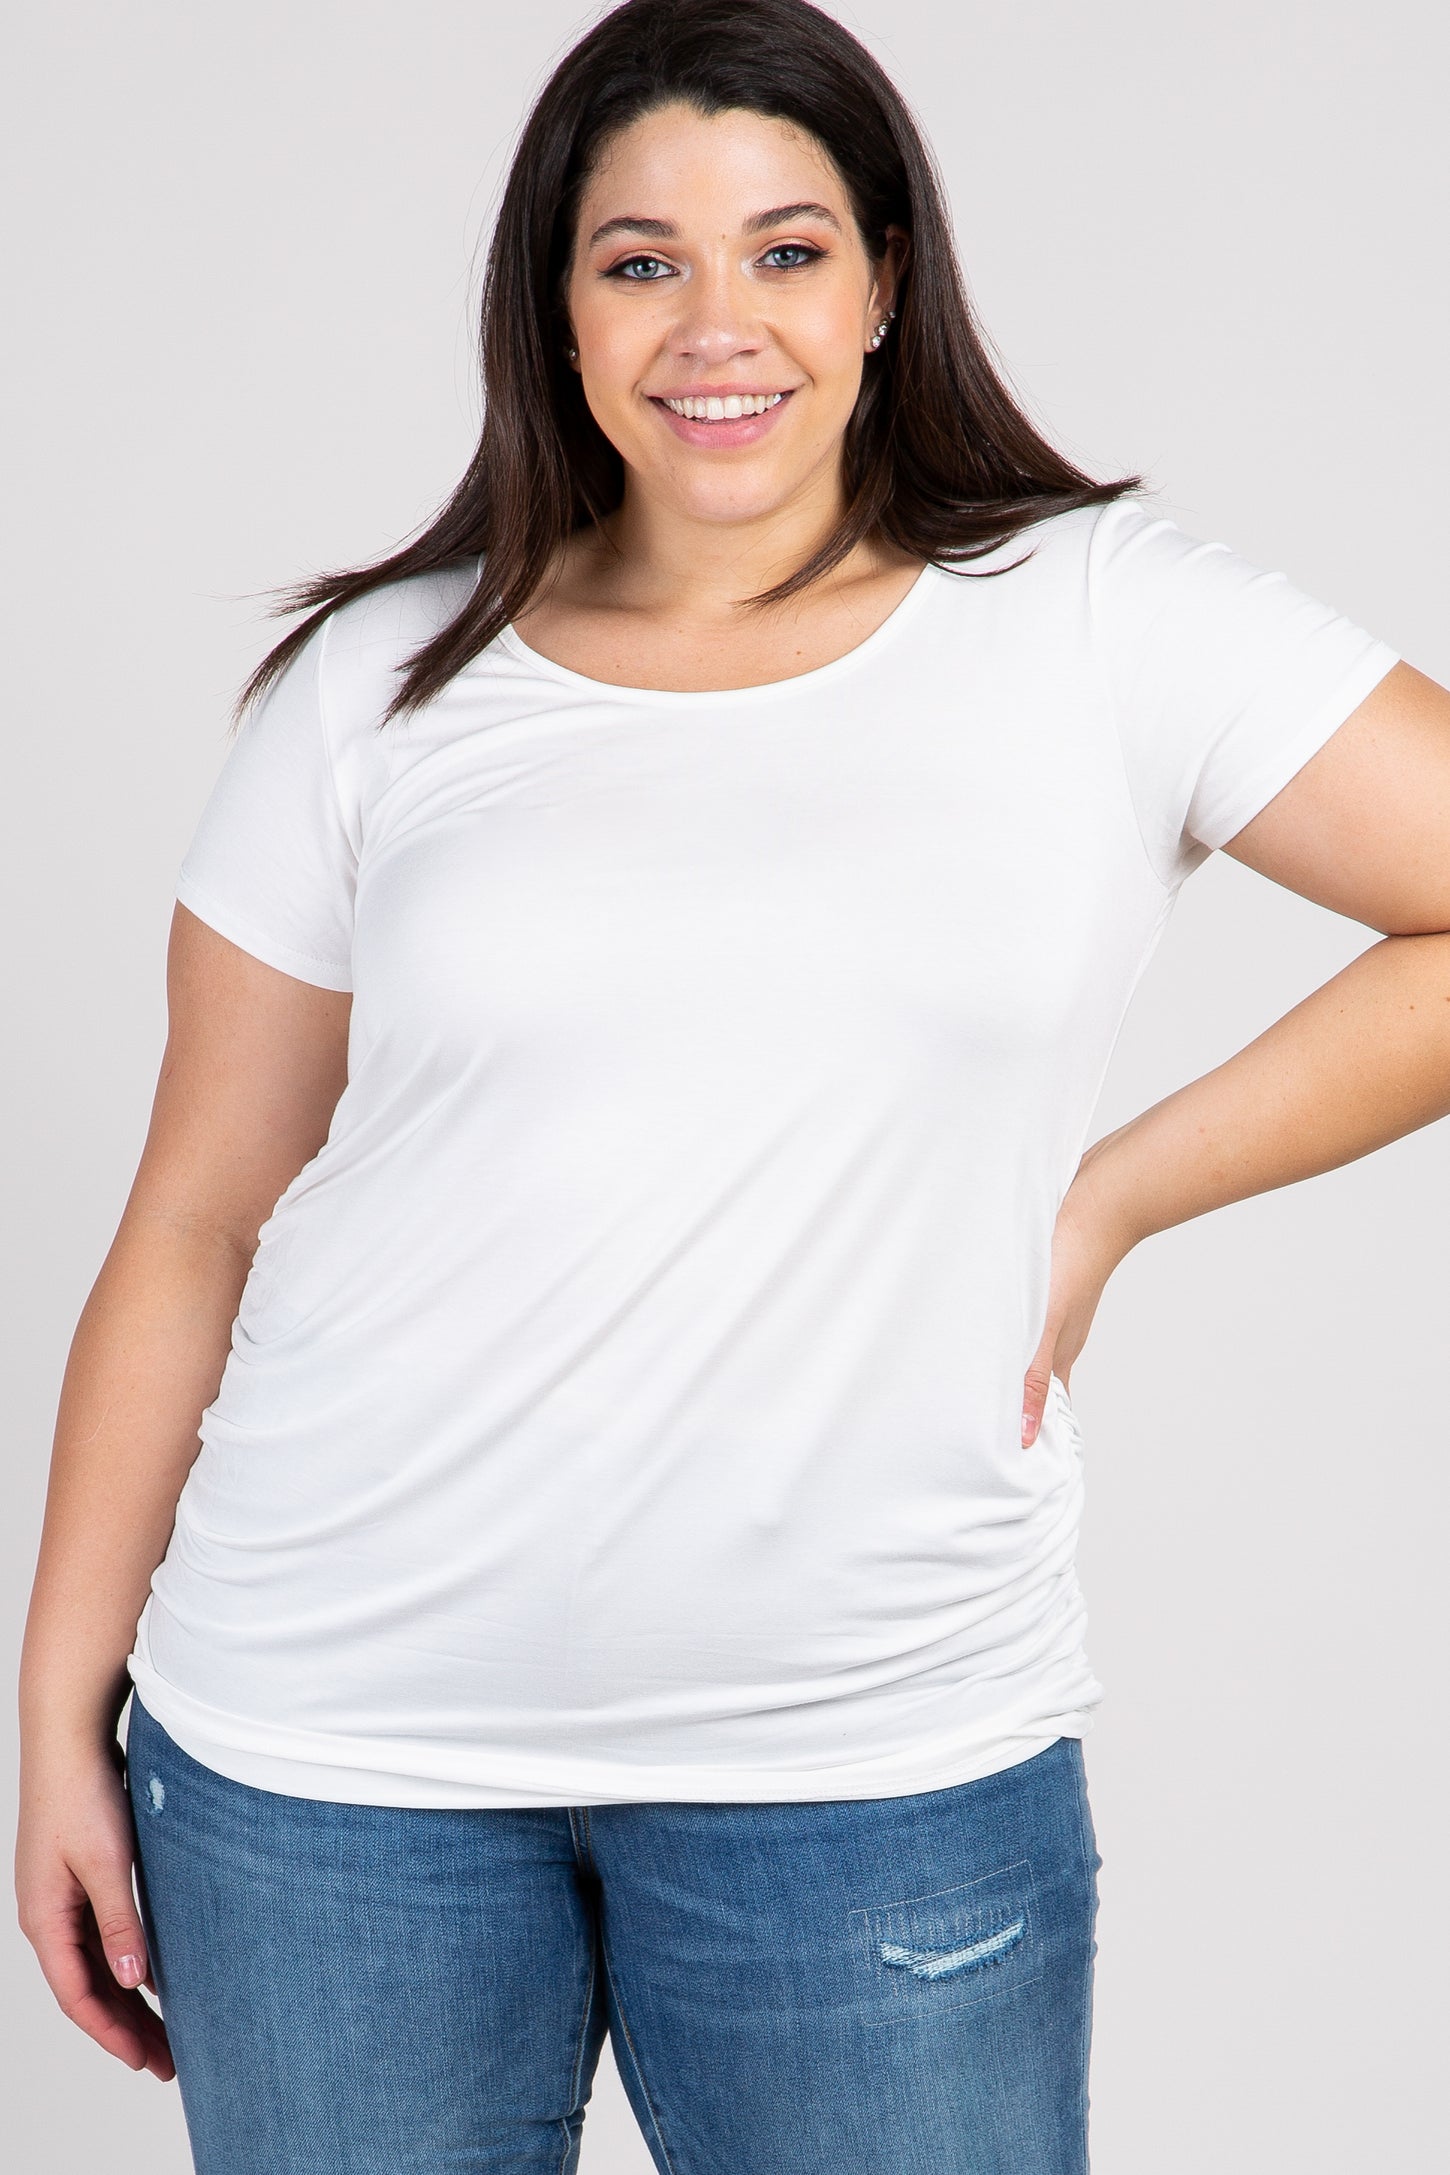 PinkBlush Ivory Ruched Short Sleeve Plus Maternity Top